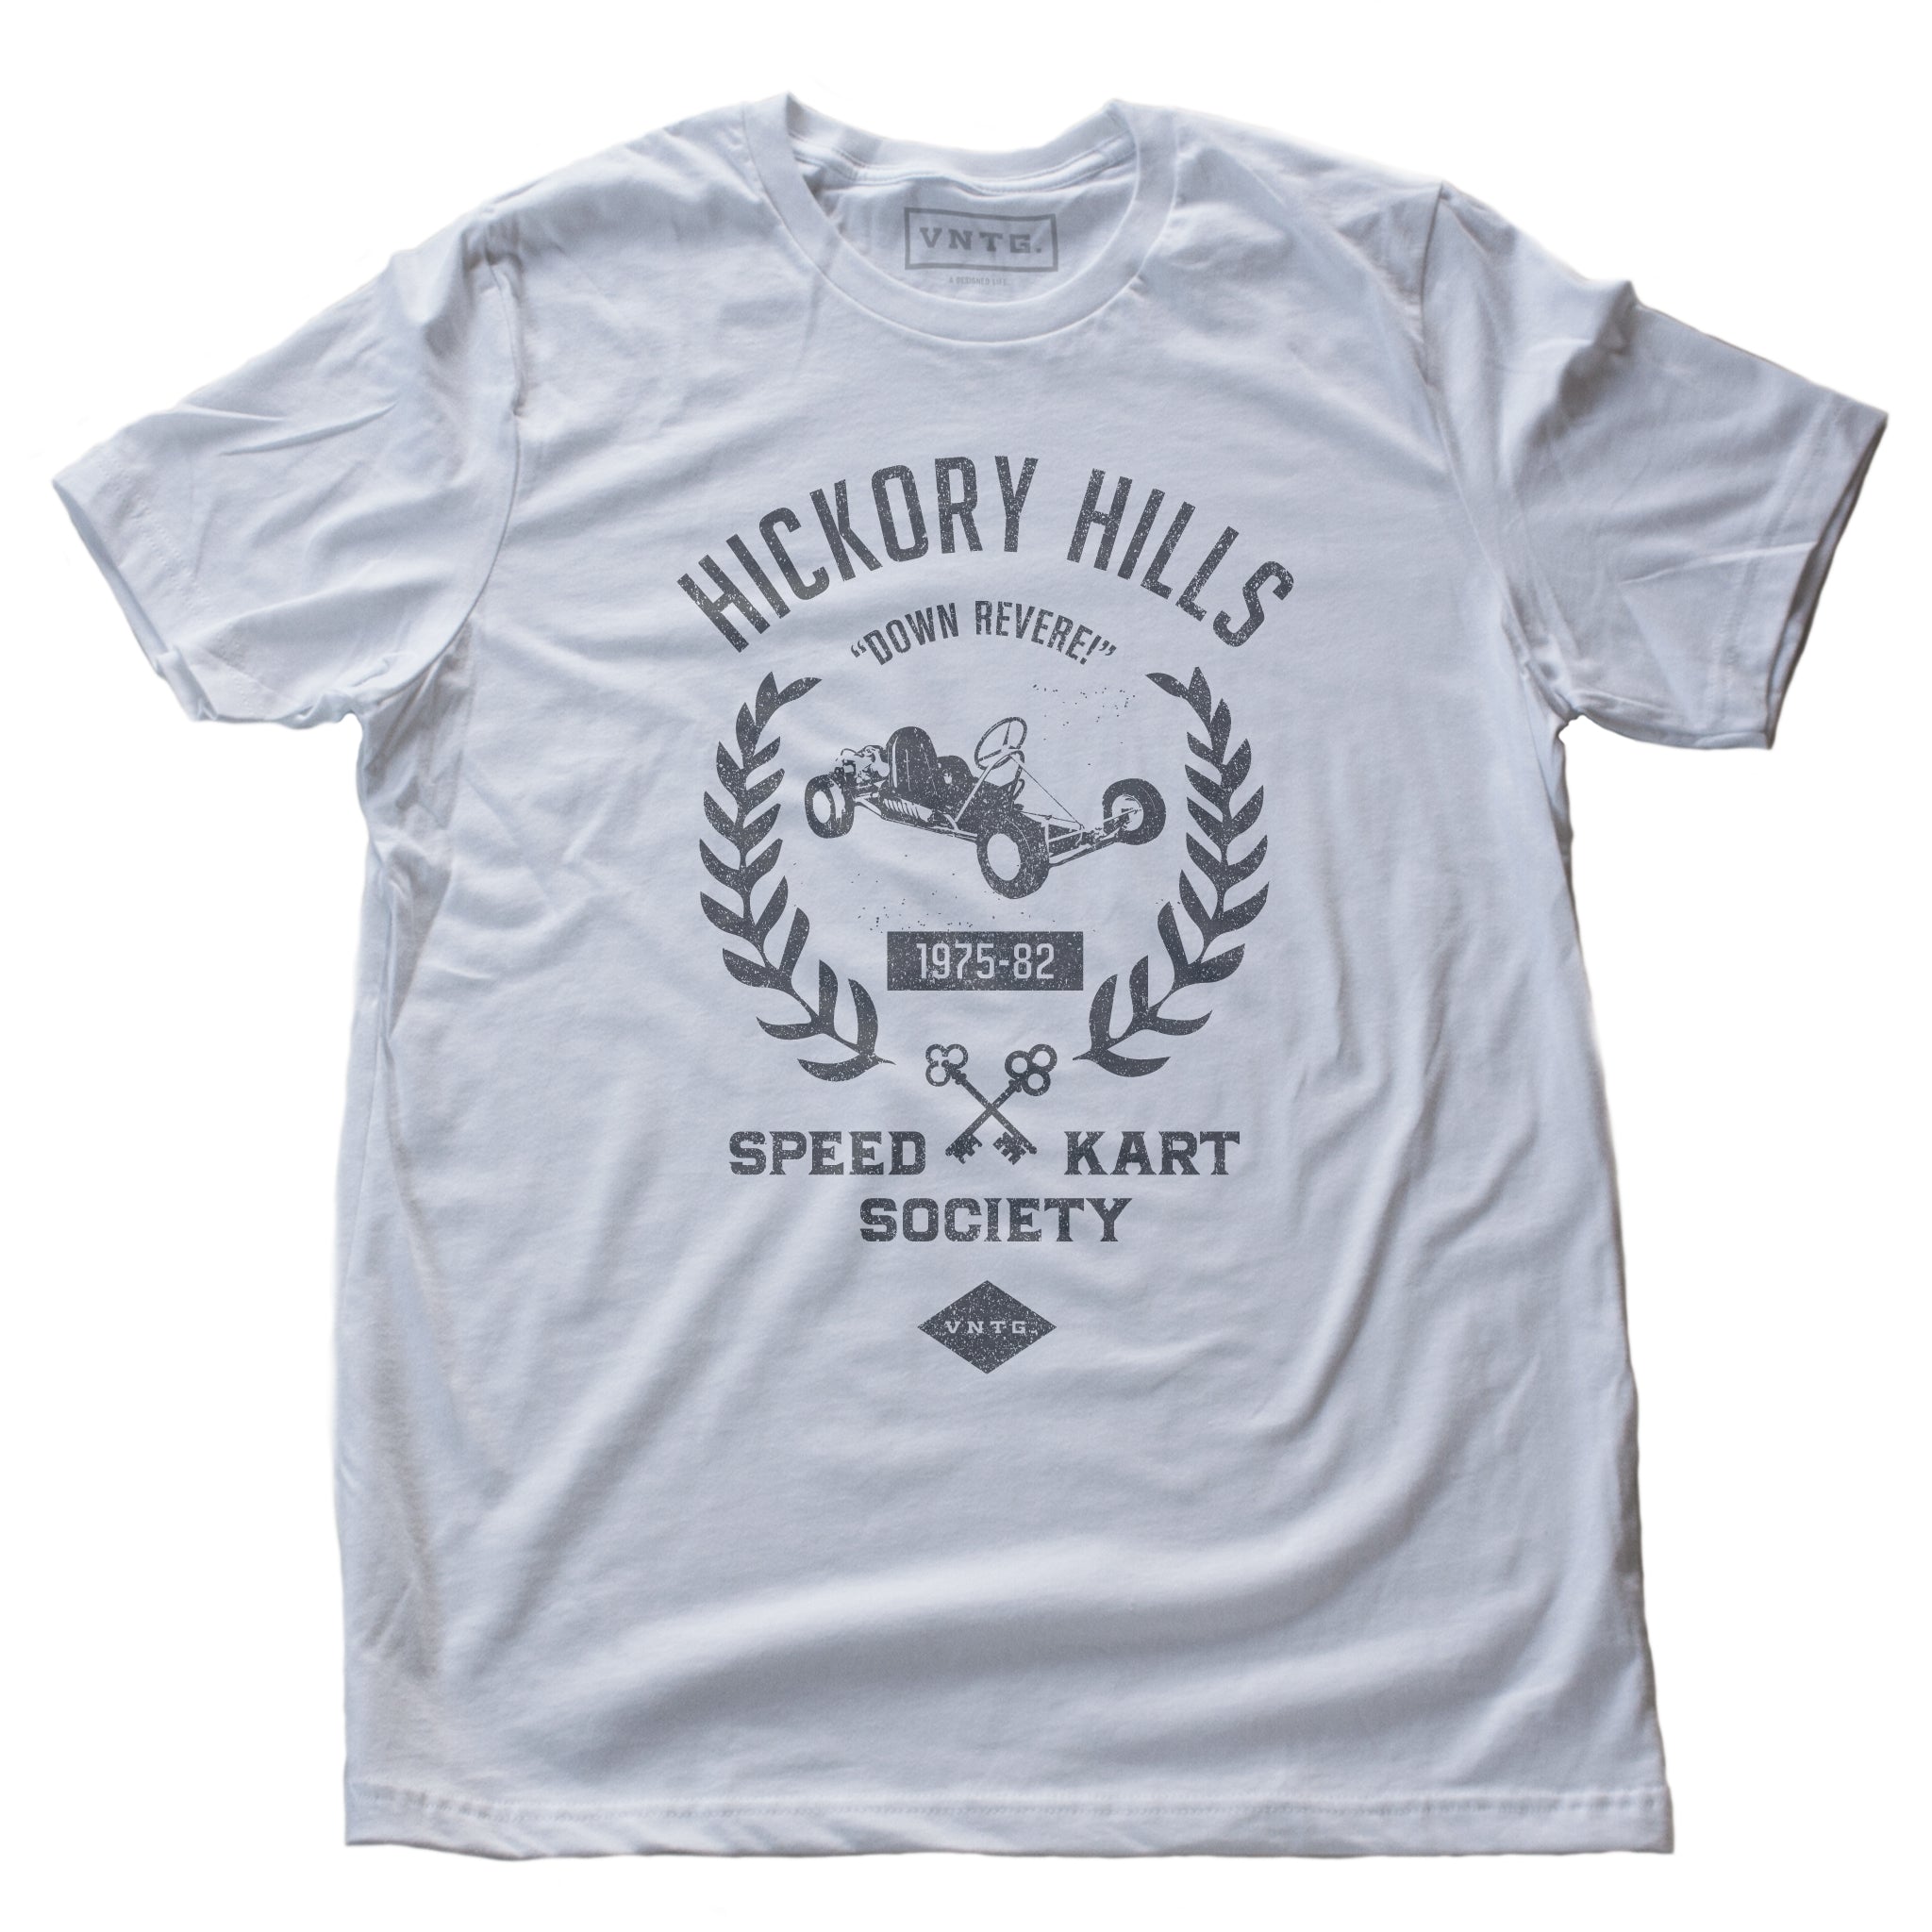 A ‘vintage fiction,’ retro t-shirt in White, picturing a go-kart, promoting a small town racing league from 1975-1982 in Hockessin, Delaware. Inspired by the films of Wes Anderson. By fashion brand VNTG., from wolfsaint.net